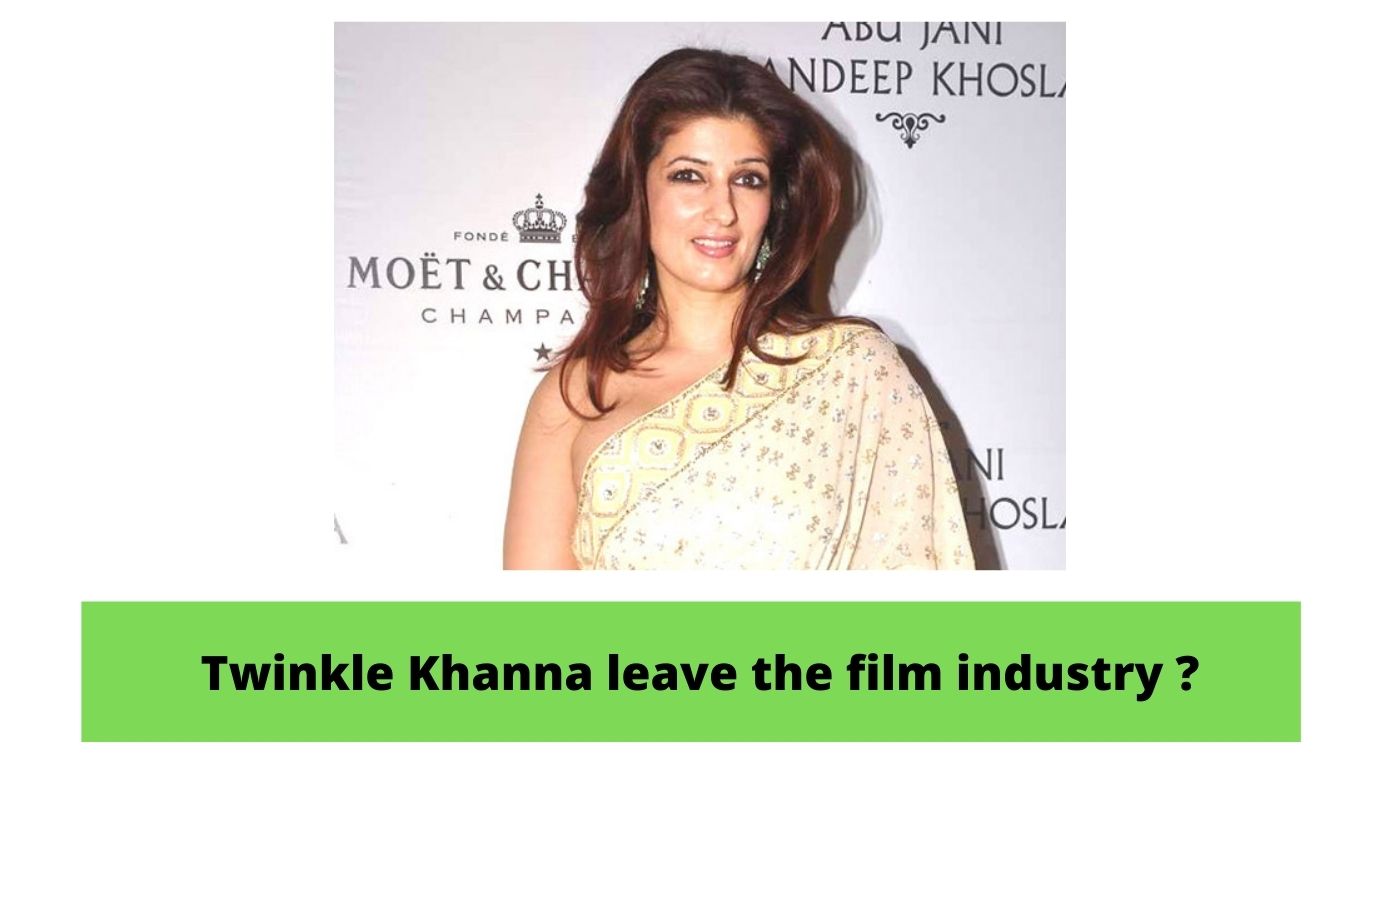 Twinkle Khanna leave the film industry